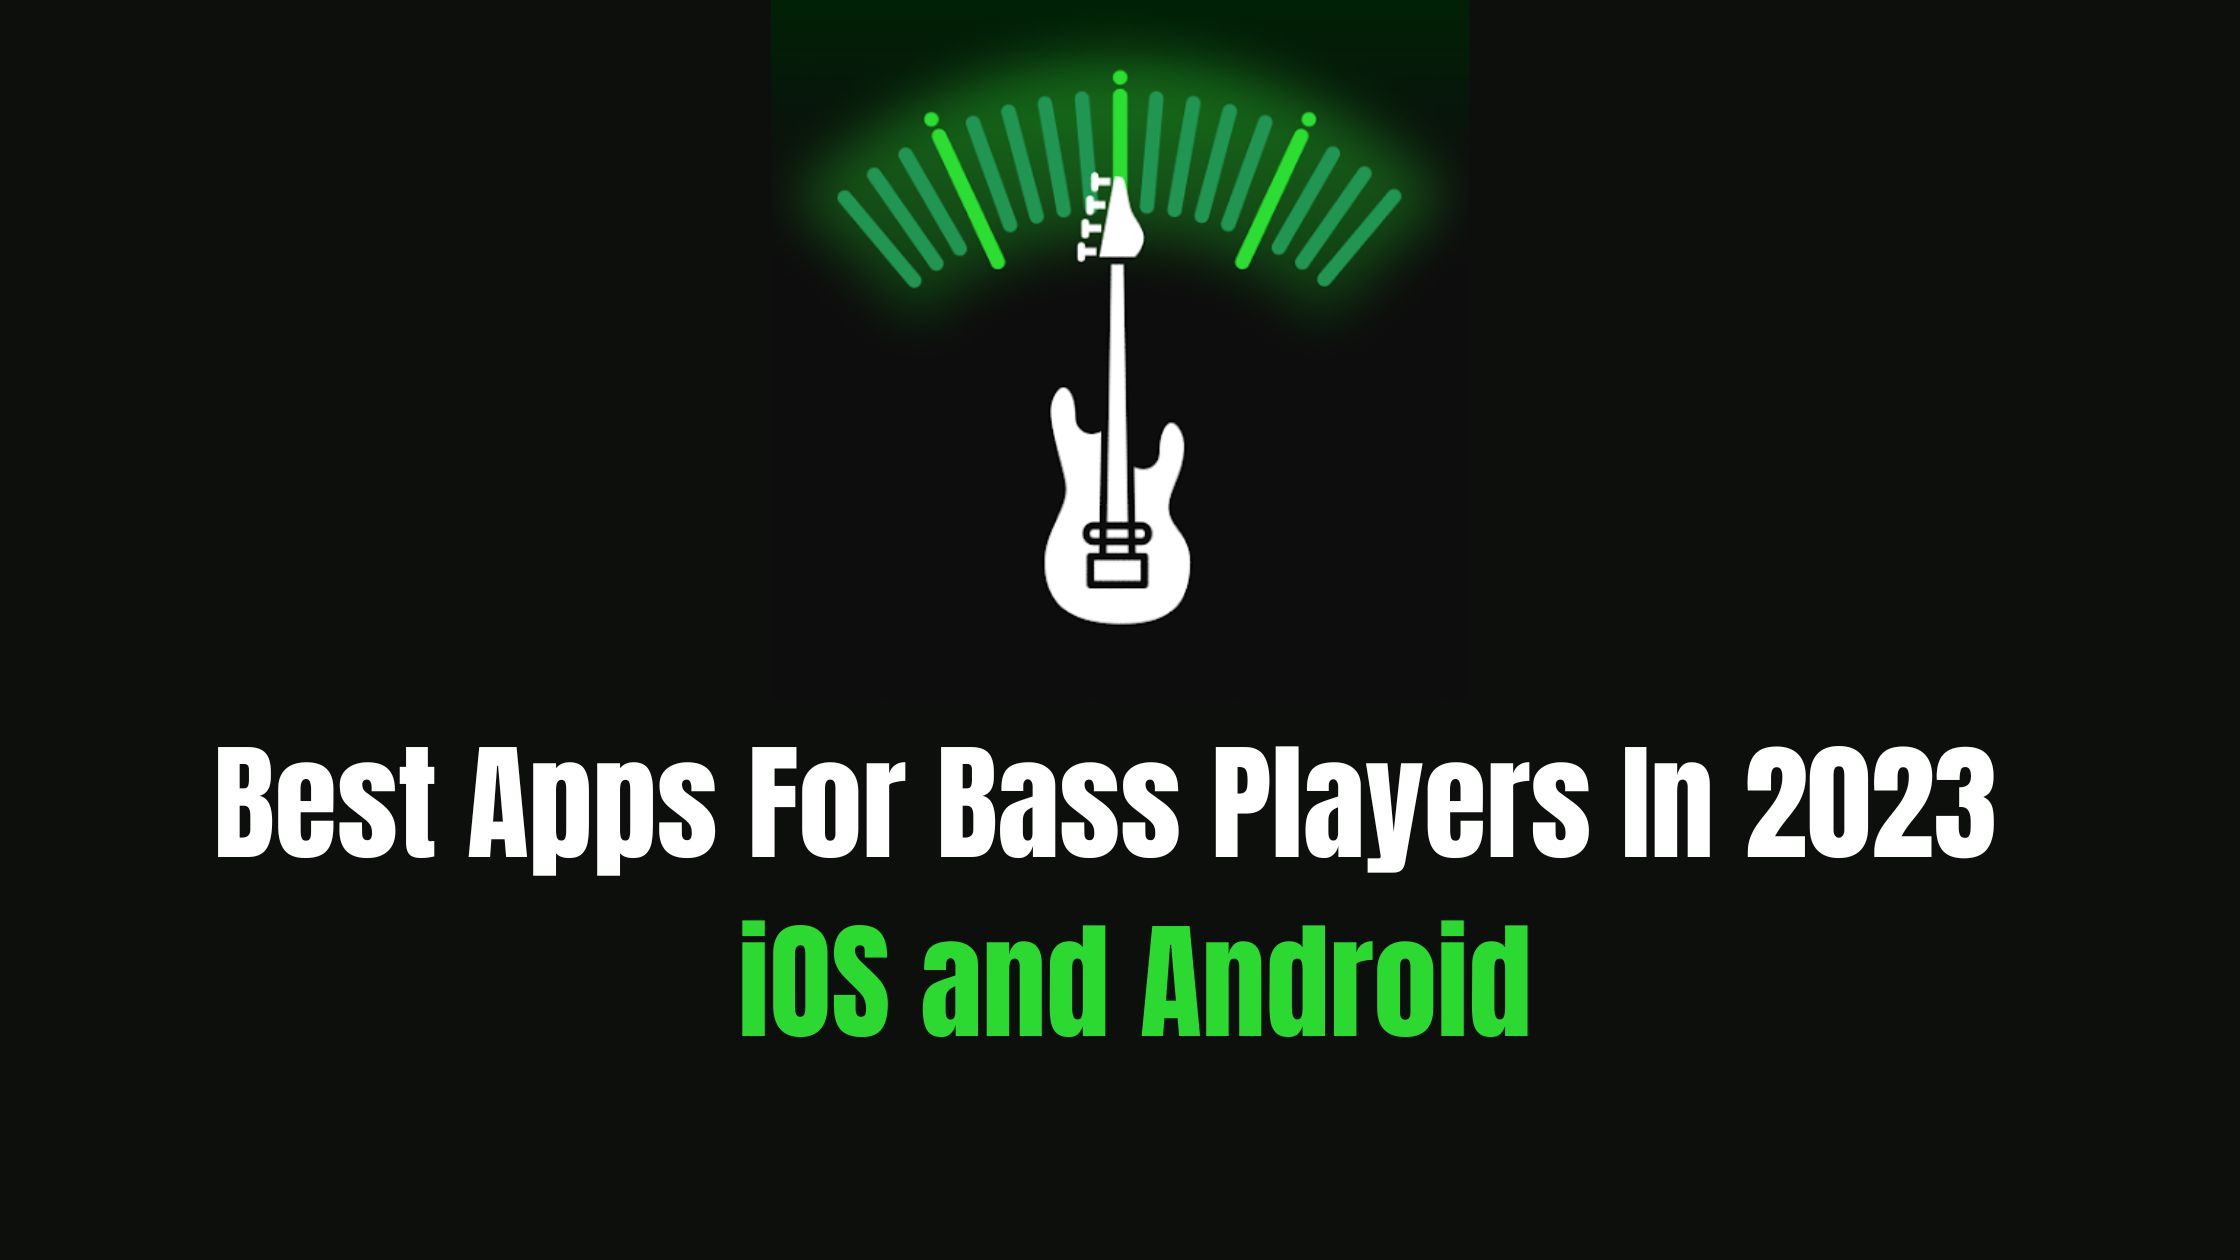 13+ Best Apps For Bass Players In 2023 | iOS and Android